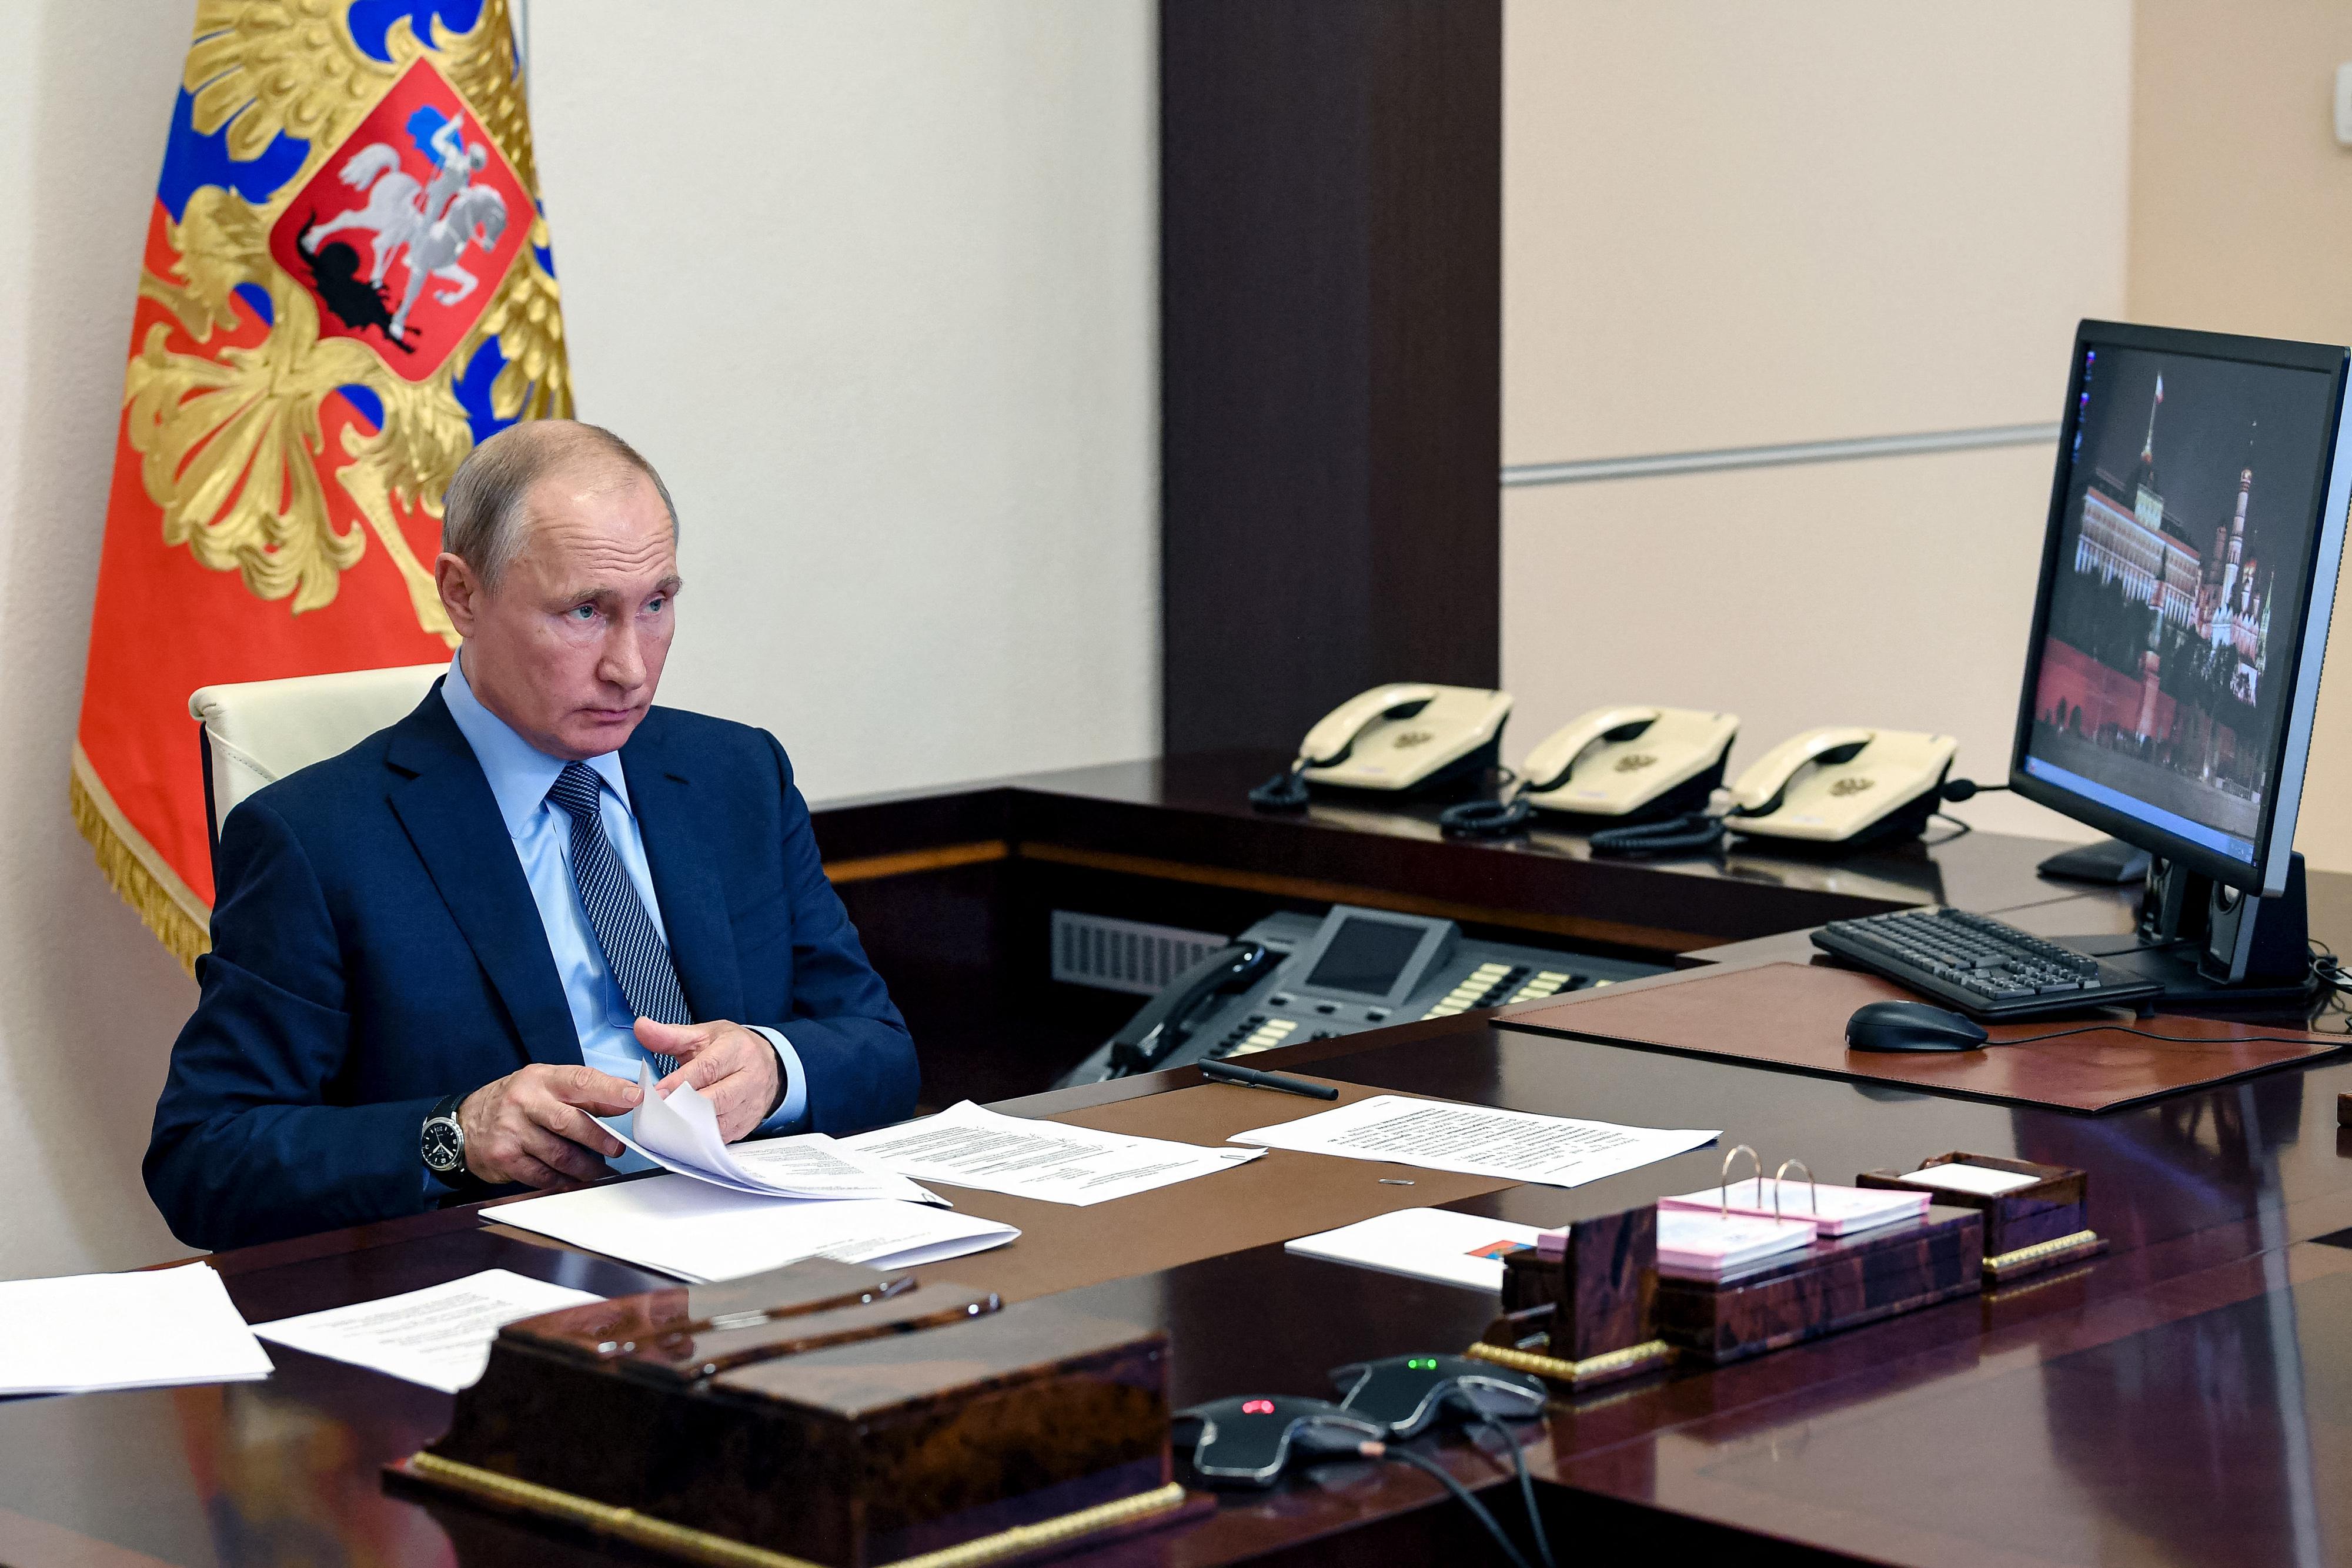 Putin sits at a desk with multiple phones and a large computer monitor in front of a flag.